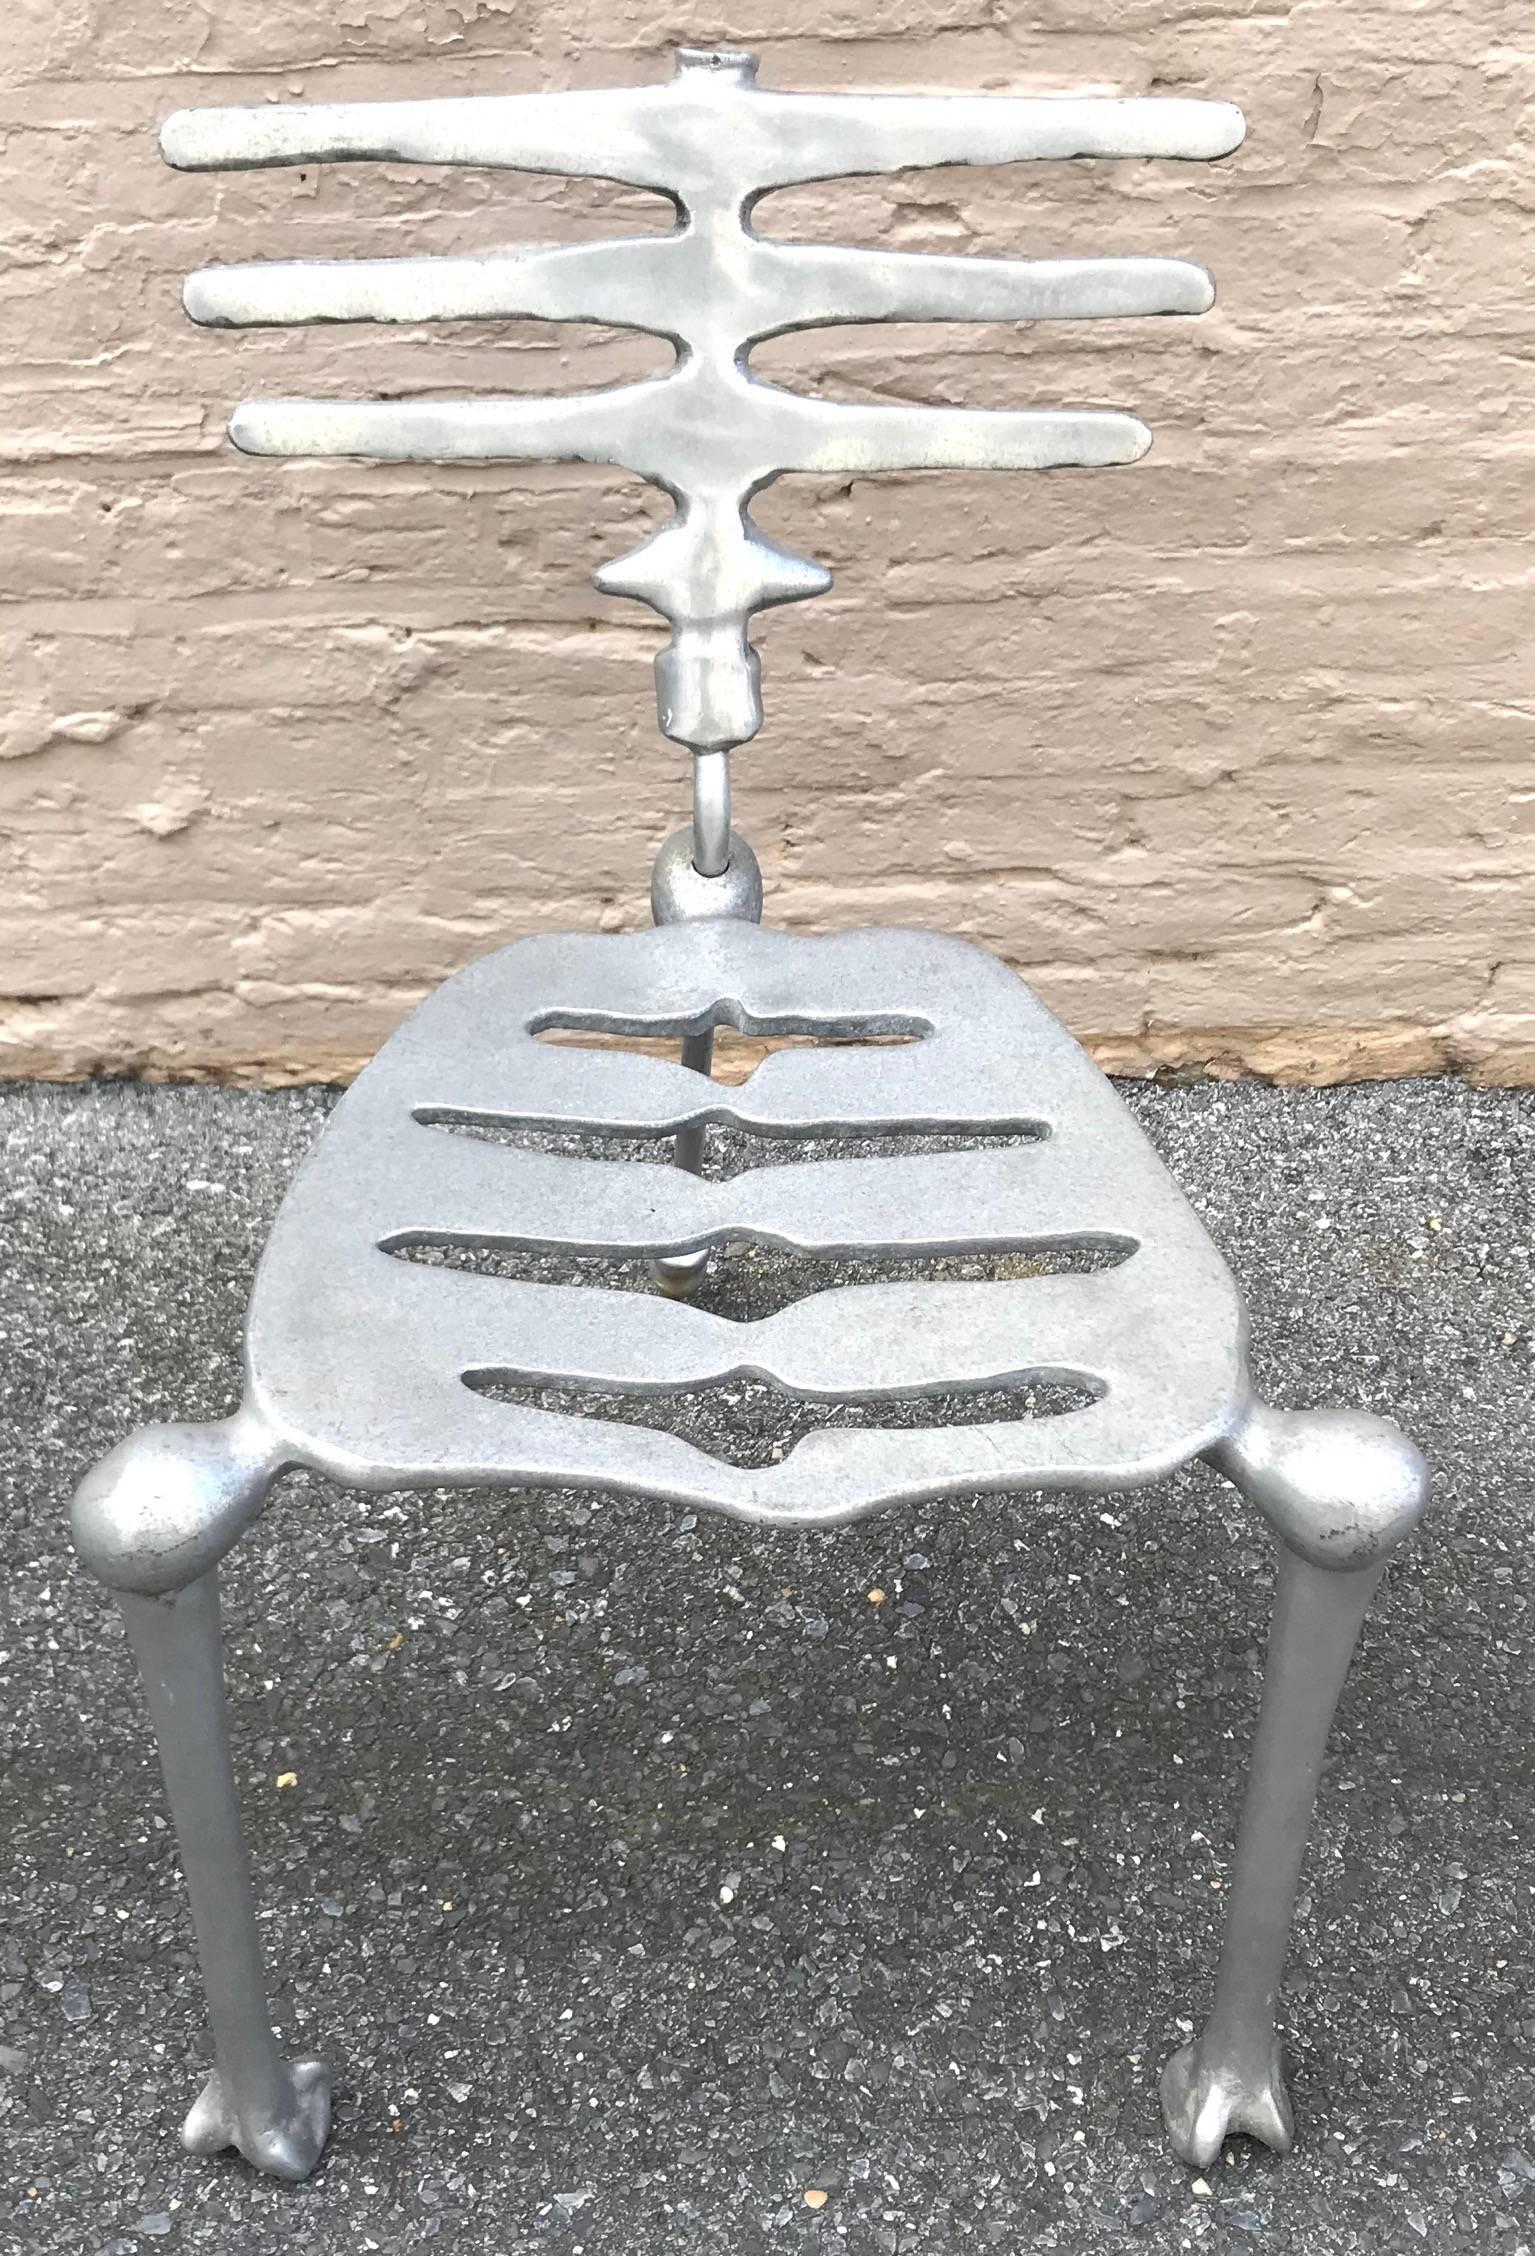 Sculptural heavy cast aluminium skeleton chair from the 1980s-1990s designed by Michael Aram. Wonderful details throughout!